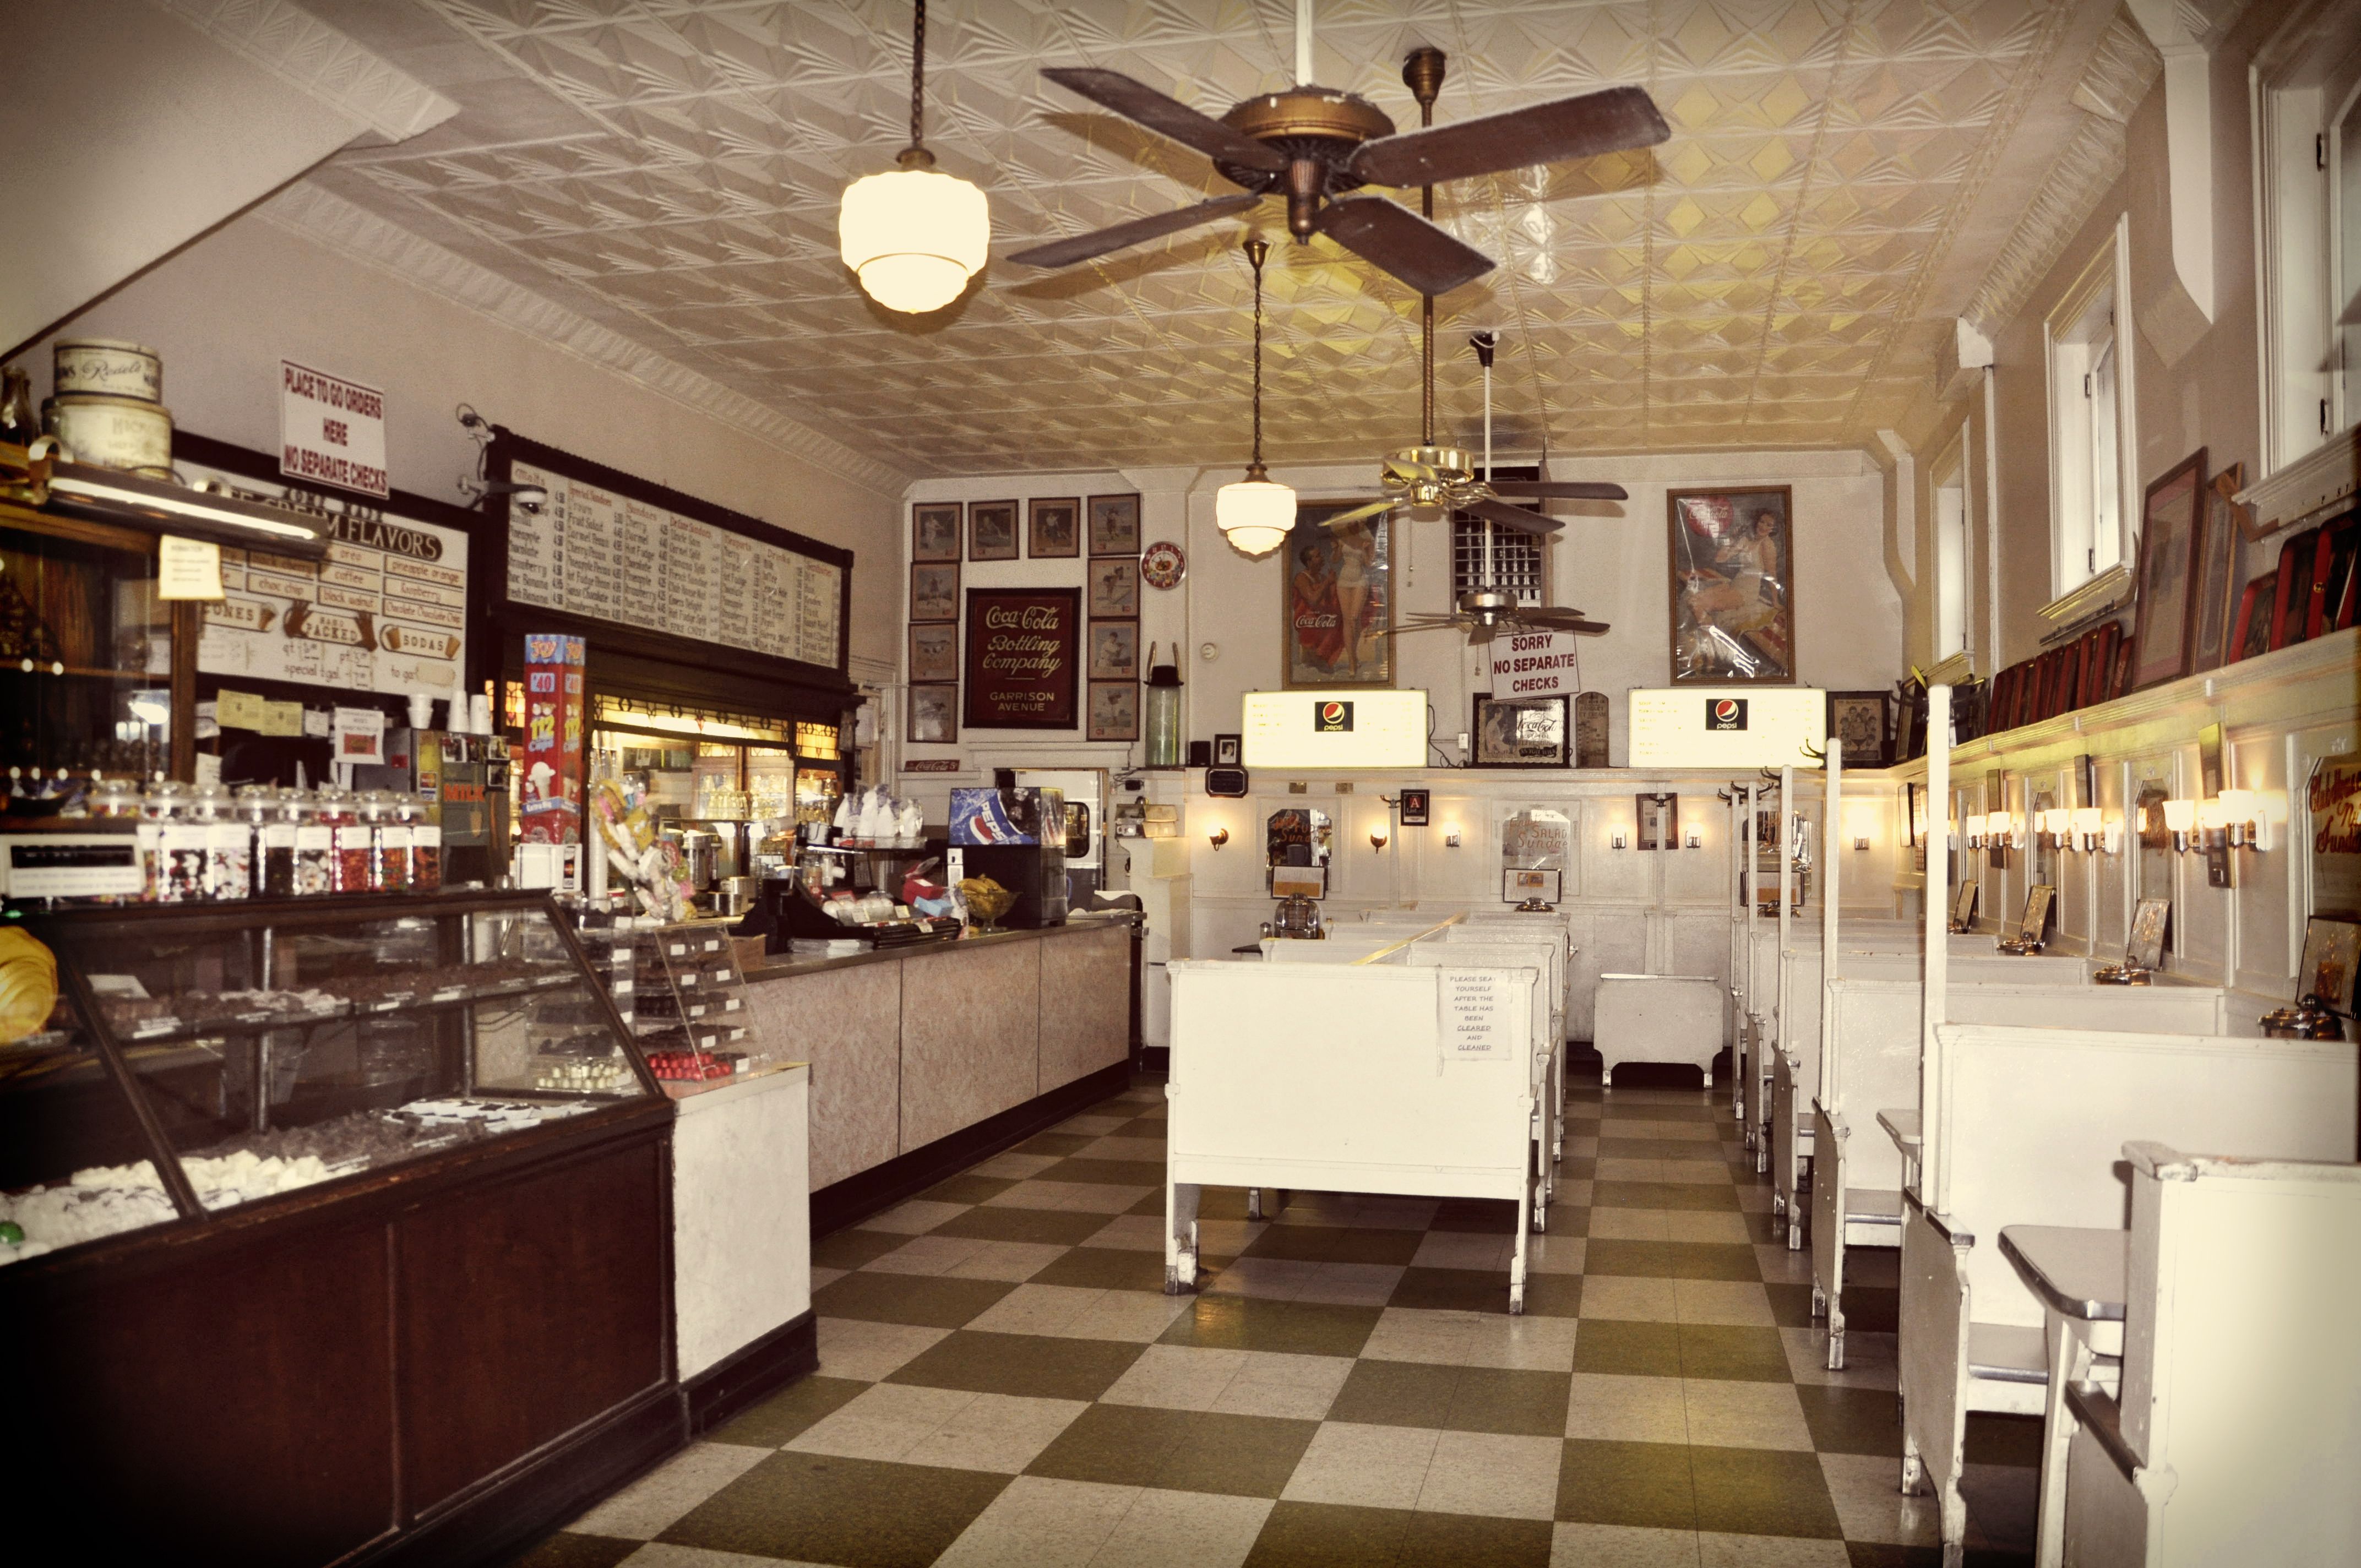 American Old-Fashioned Ice Cream Parlor